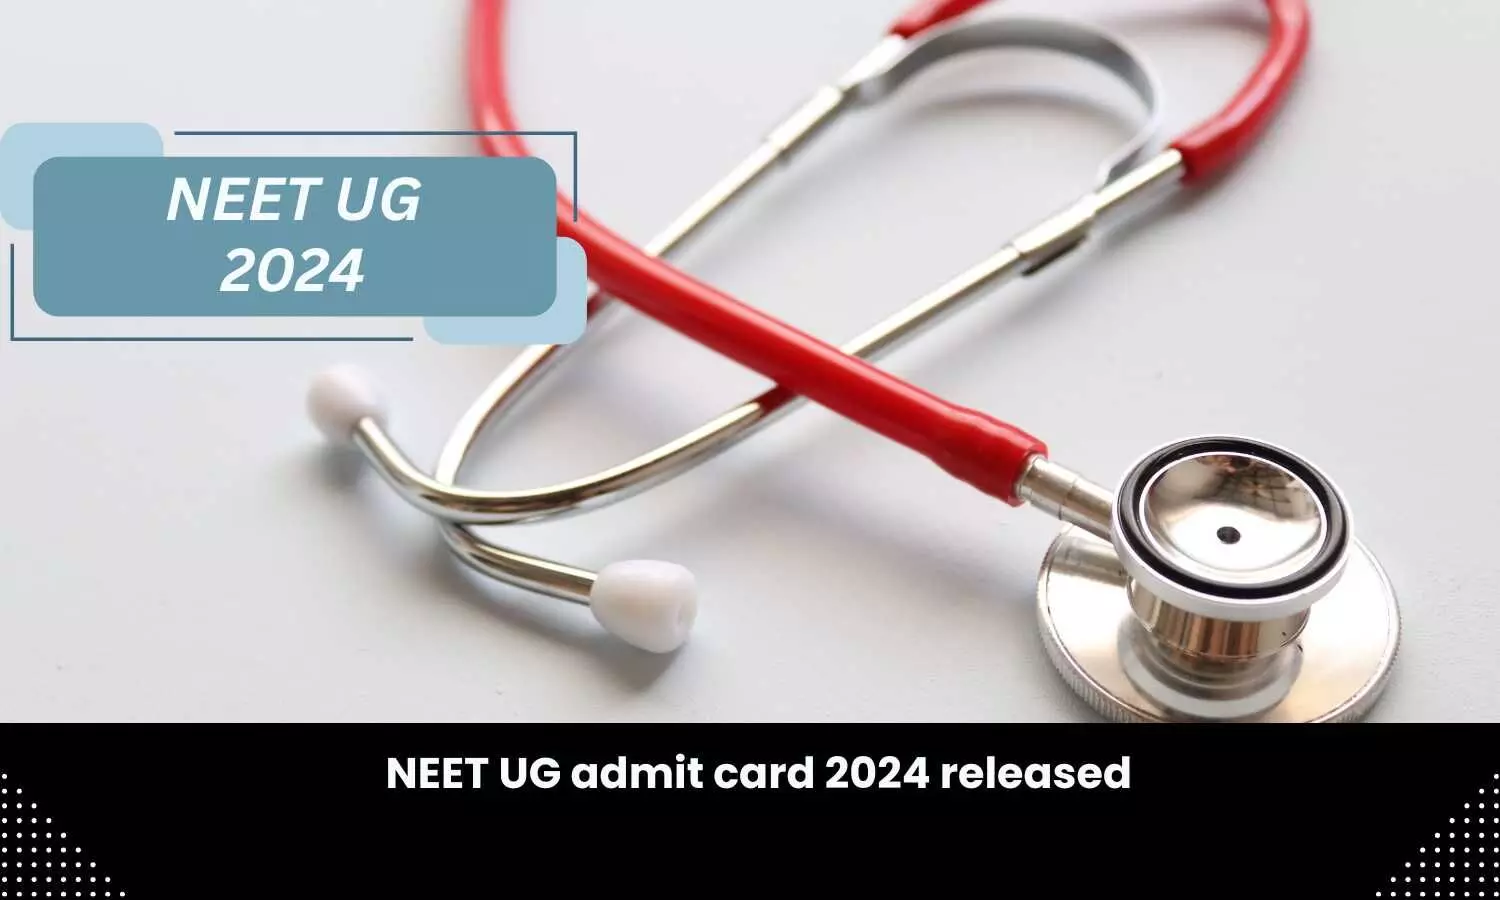 Admit card of NEET 2024 released